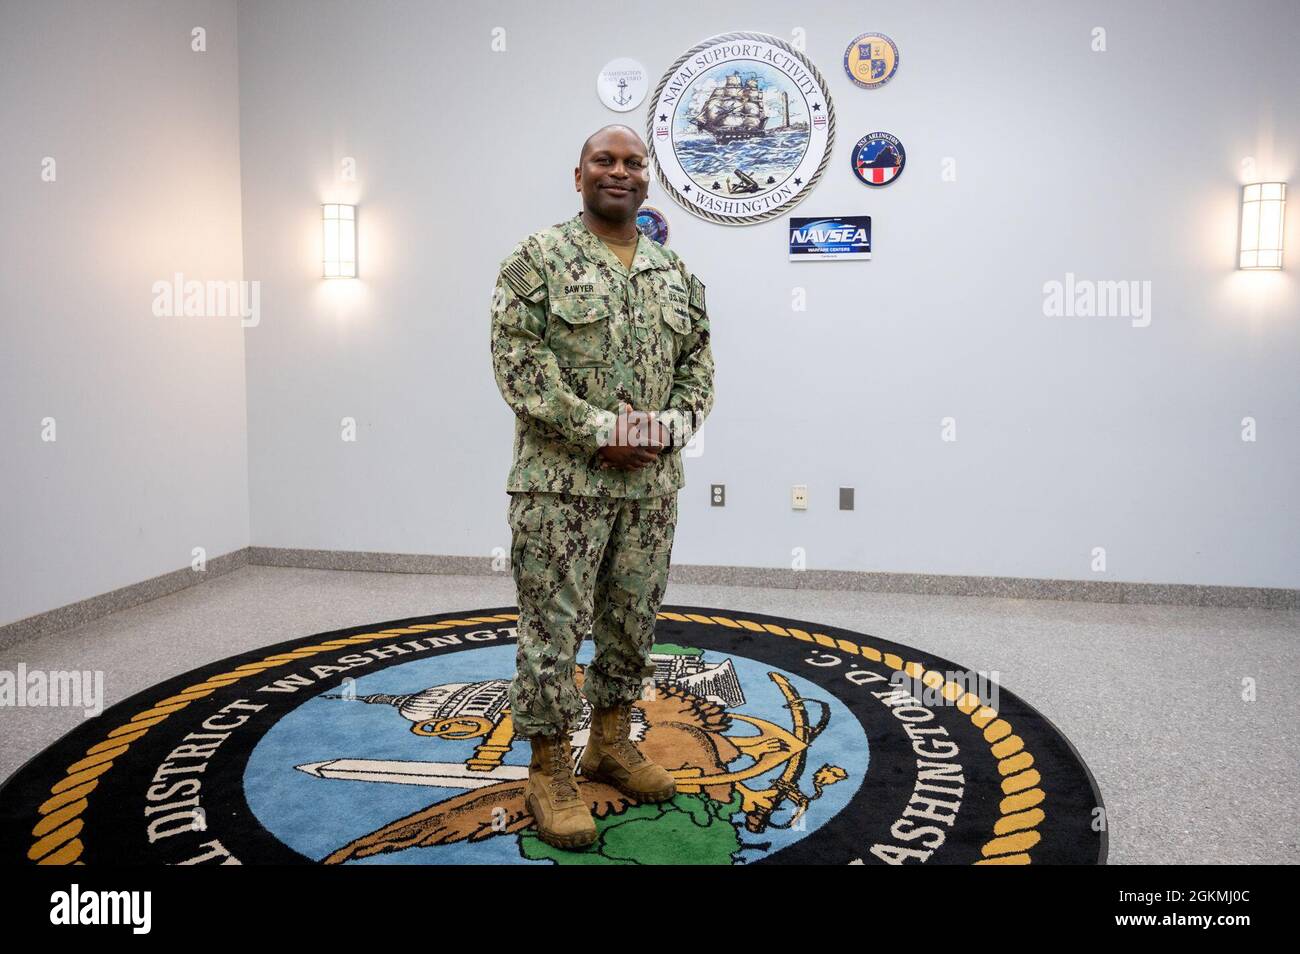 WASHINGTON, DC (May 27, 2021) – Chief Operations Specialist Marcus Sawyer poses onboard Washington Navy Yard, before an end-of-tour award ceremony held in his honor. Stock Photo